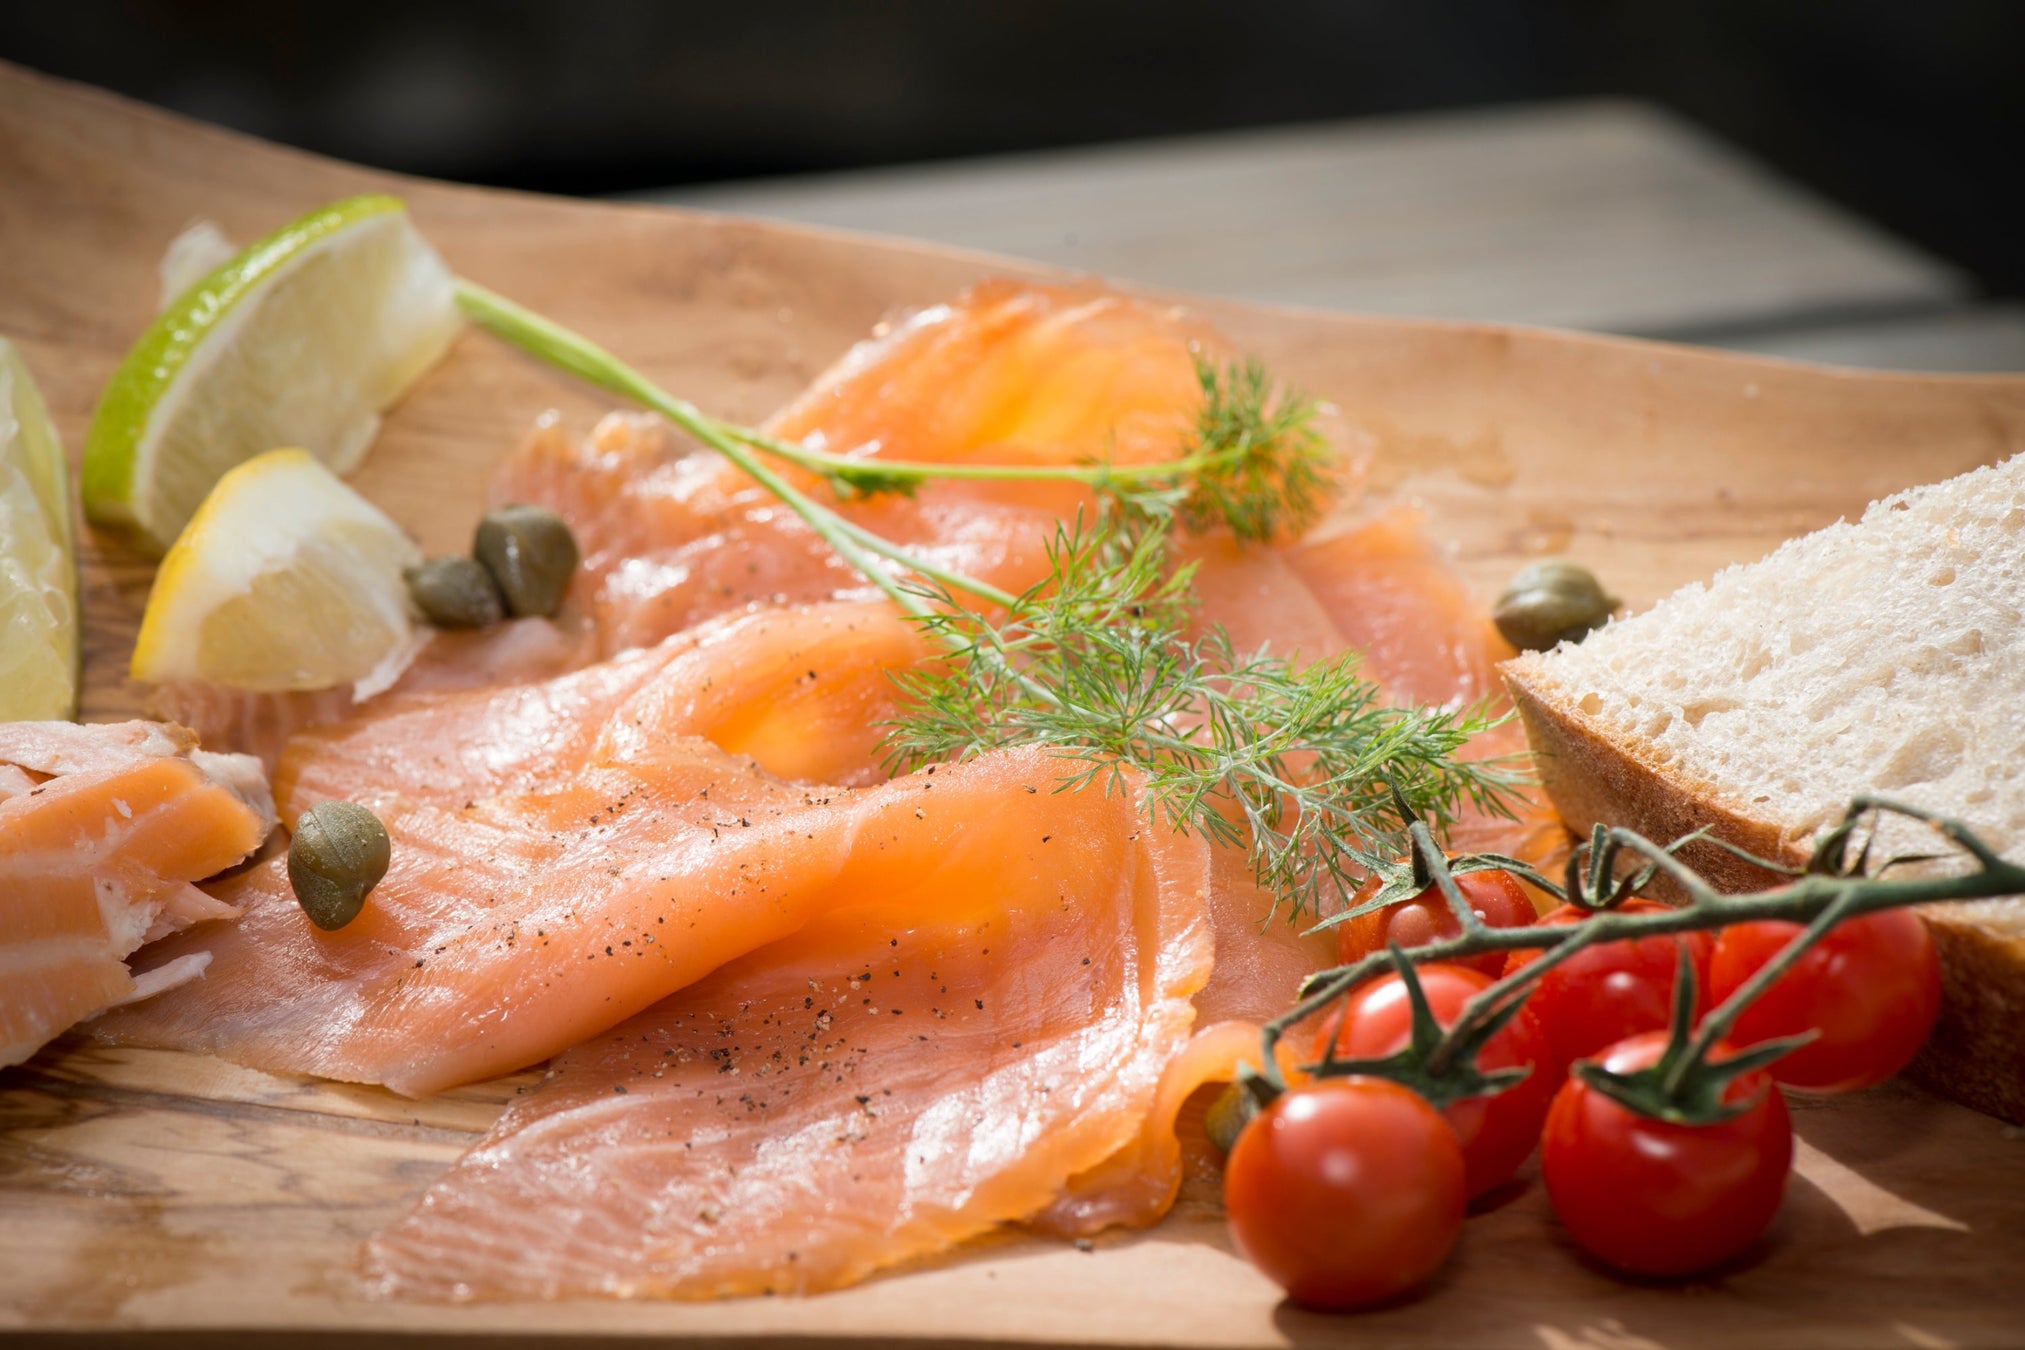 Jaffy's Peat  Smoked Salmon is smoked over Peat and Oak fires giving it a deeper more intense flavour.